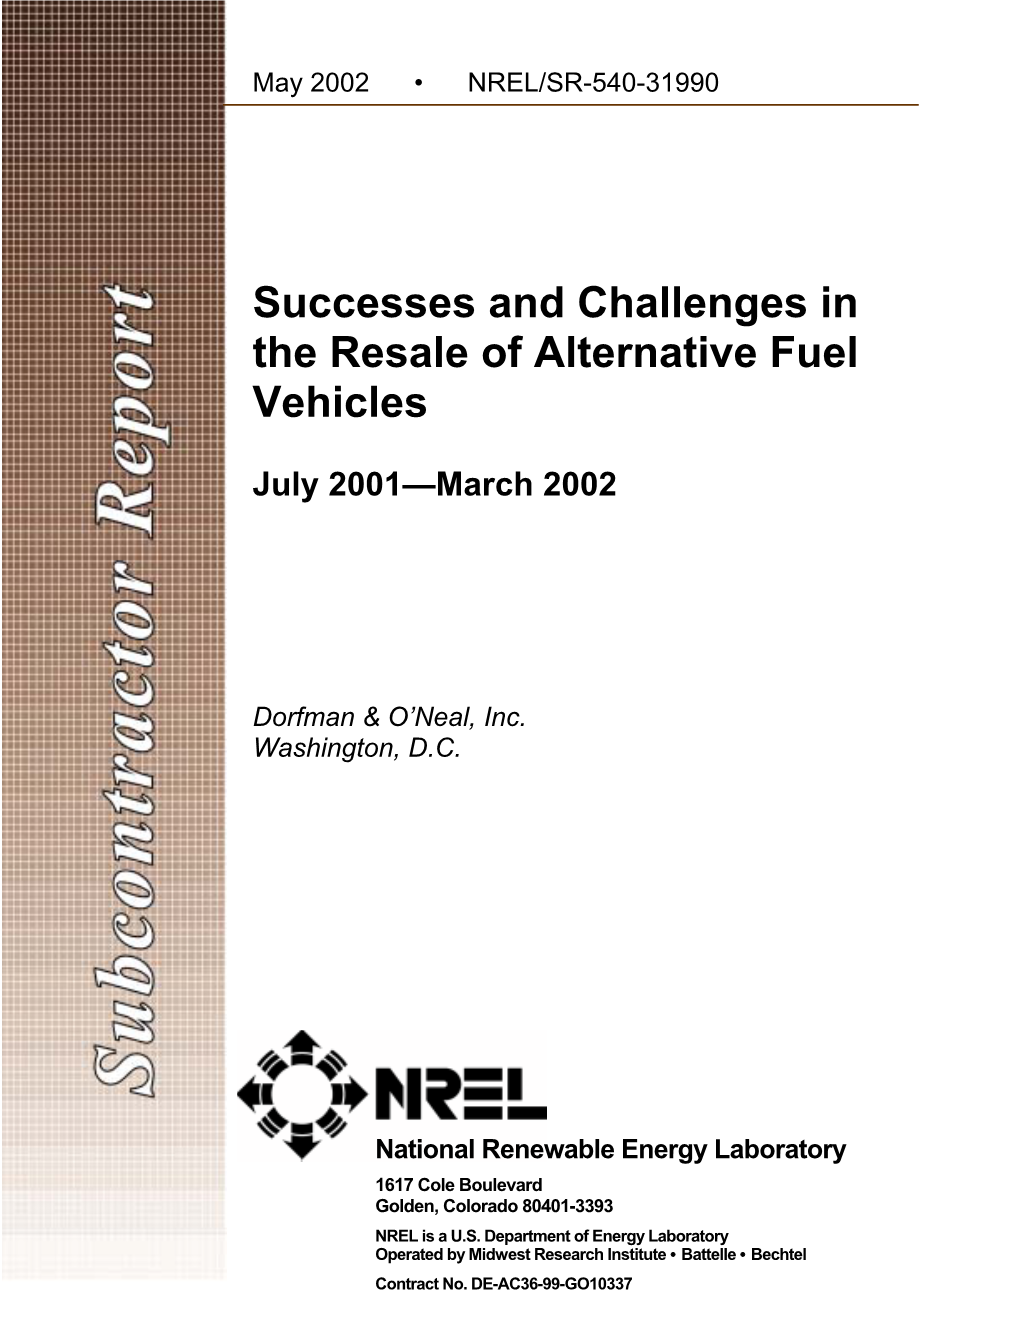 Successes and Challenges in the Resale of Alternative Fuel Vehicles